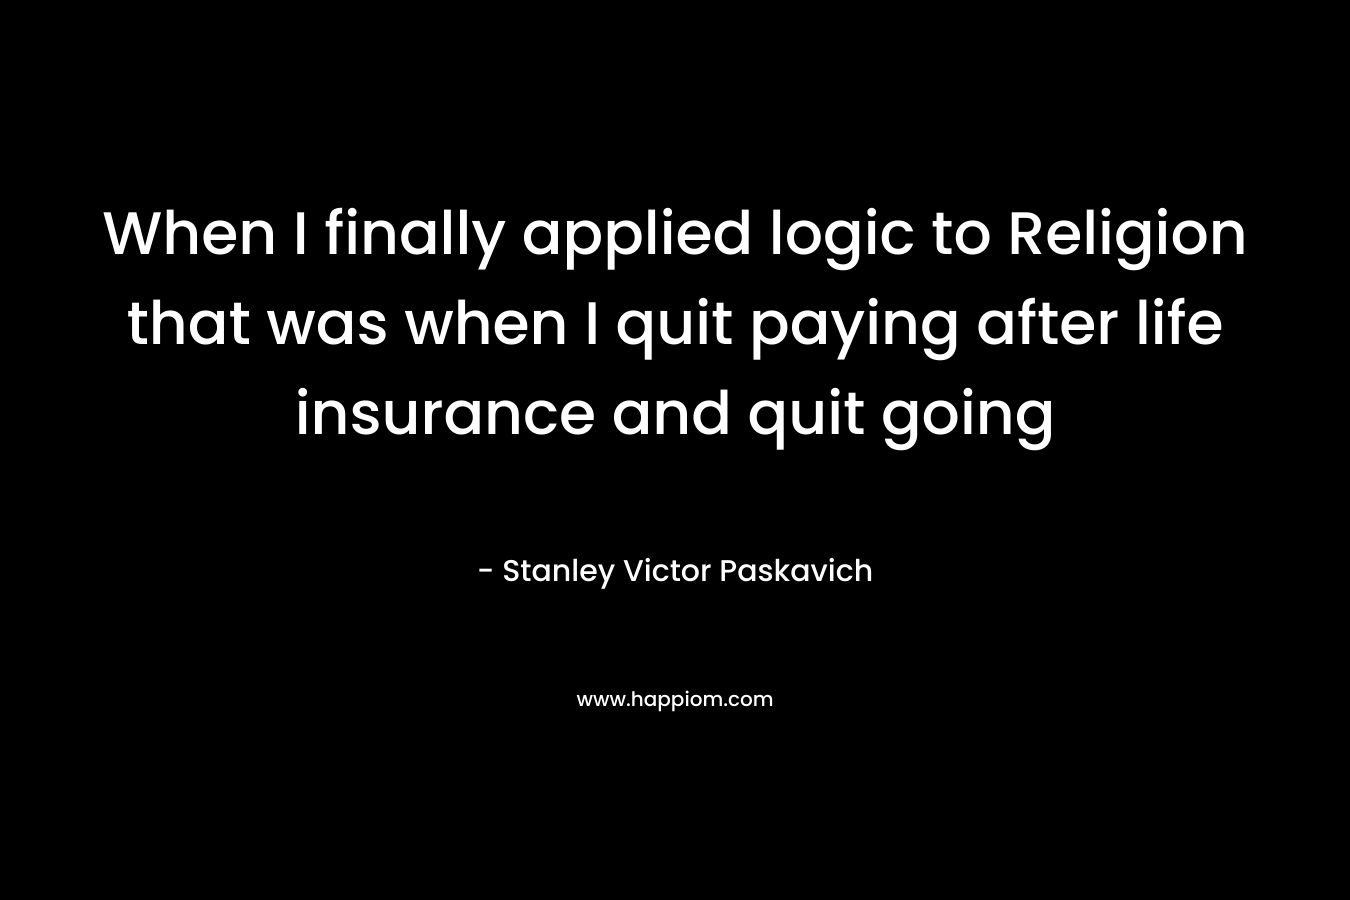 When I finally applied logic to Religion that was when I quit paying after life insurance and quit going